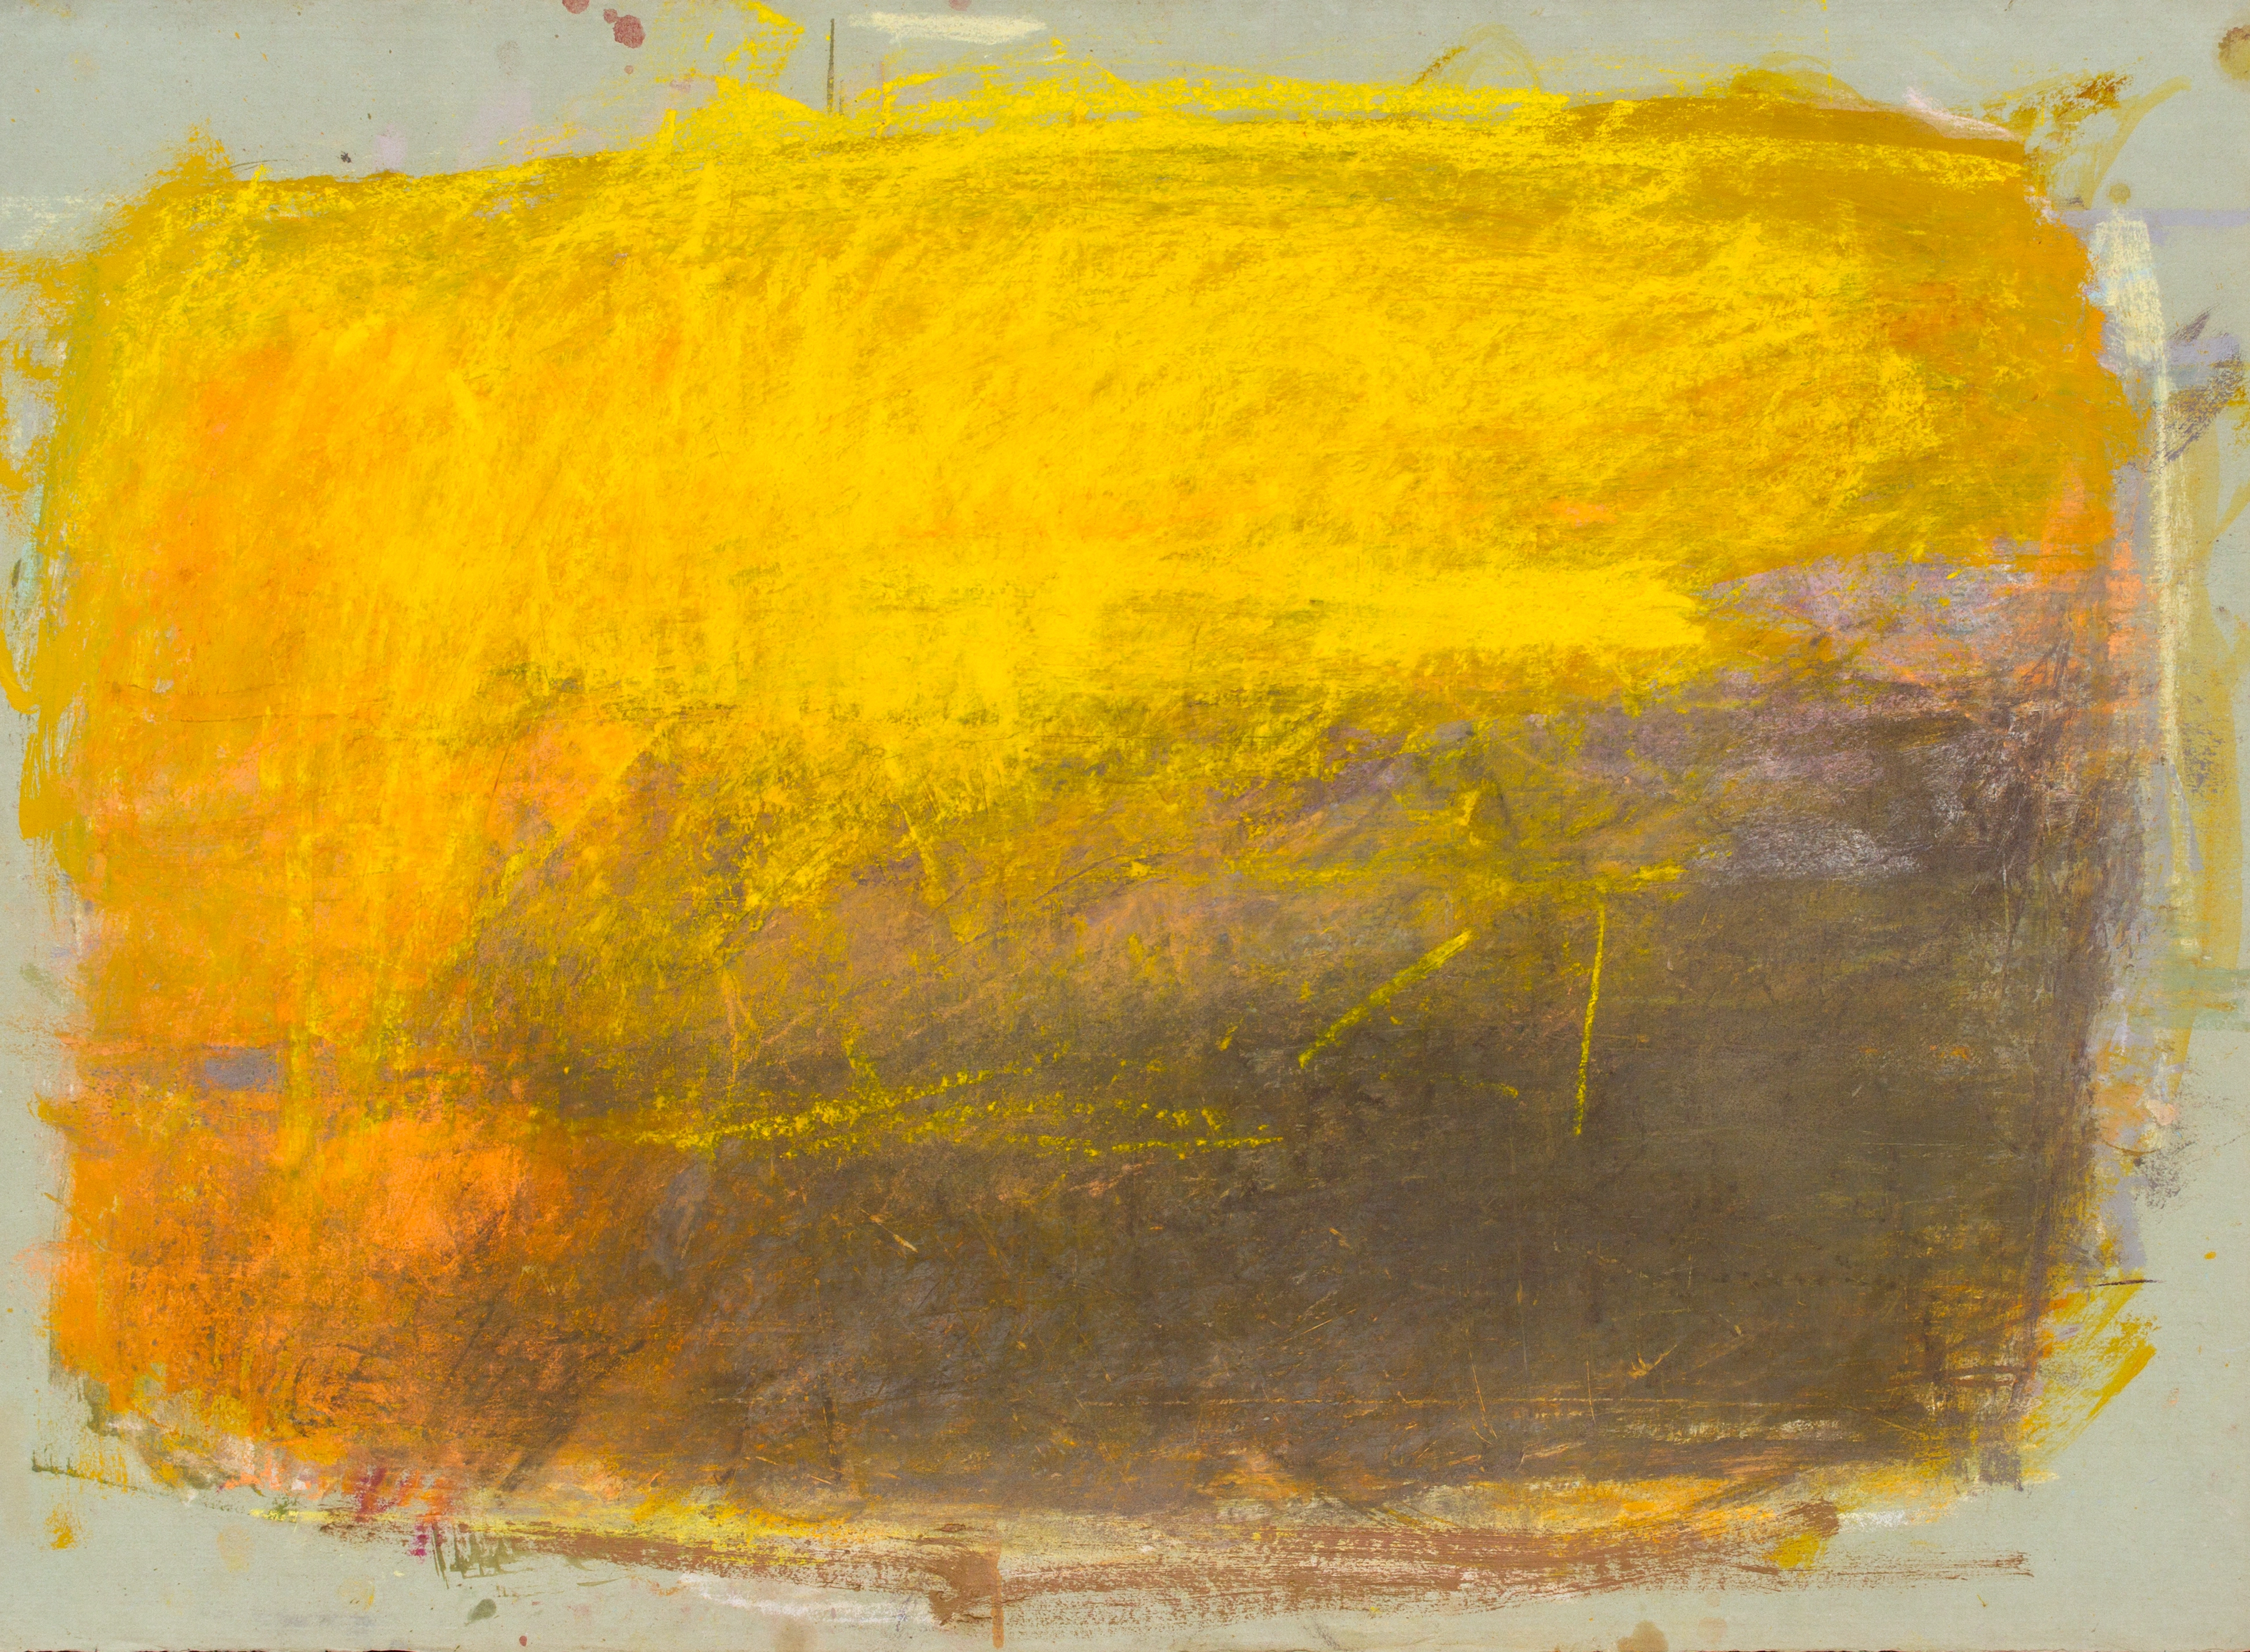 Abstract oil paint and pastel on grey paper comprised of dense stokes of yellow, purple, and orange.